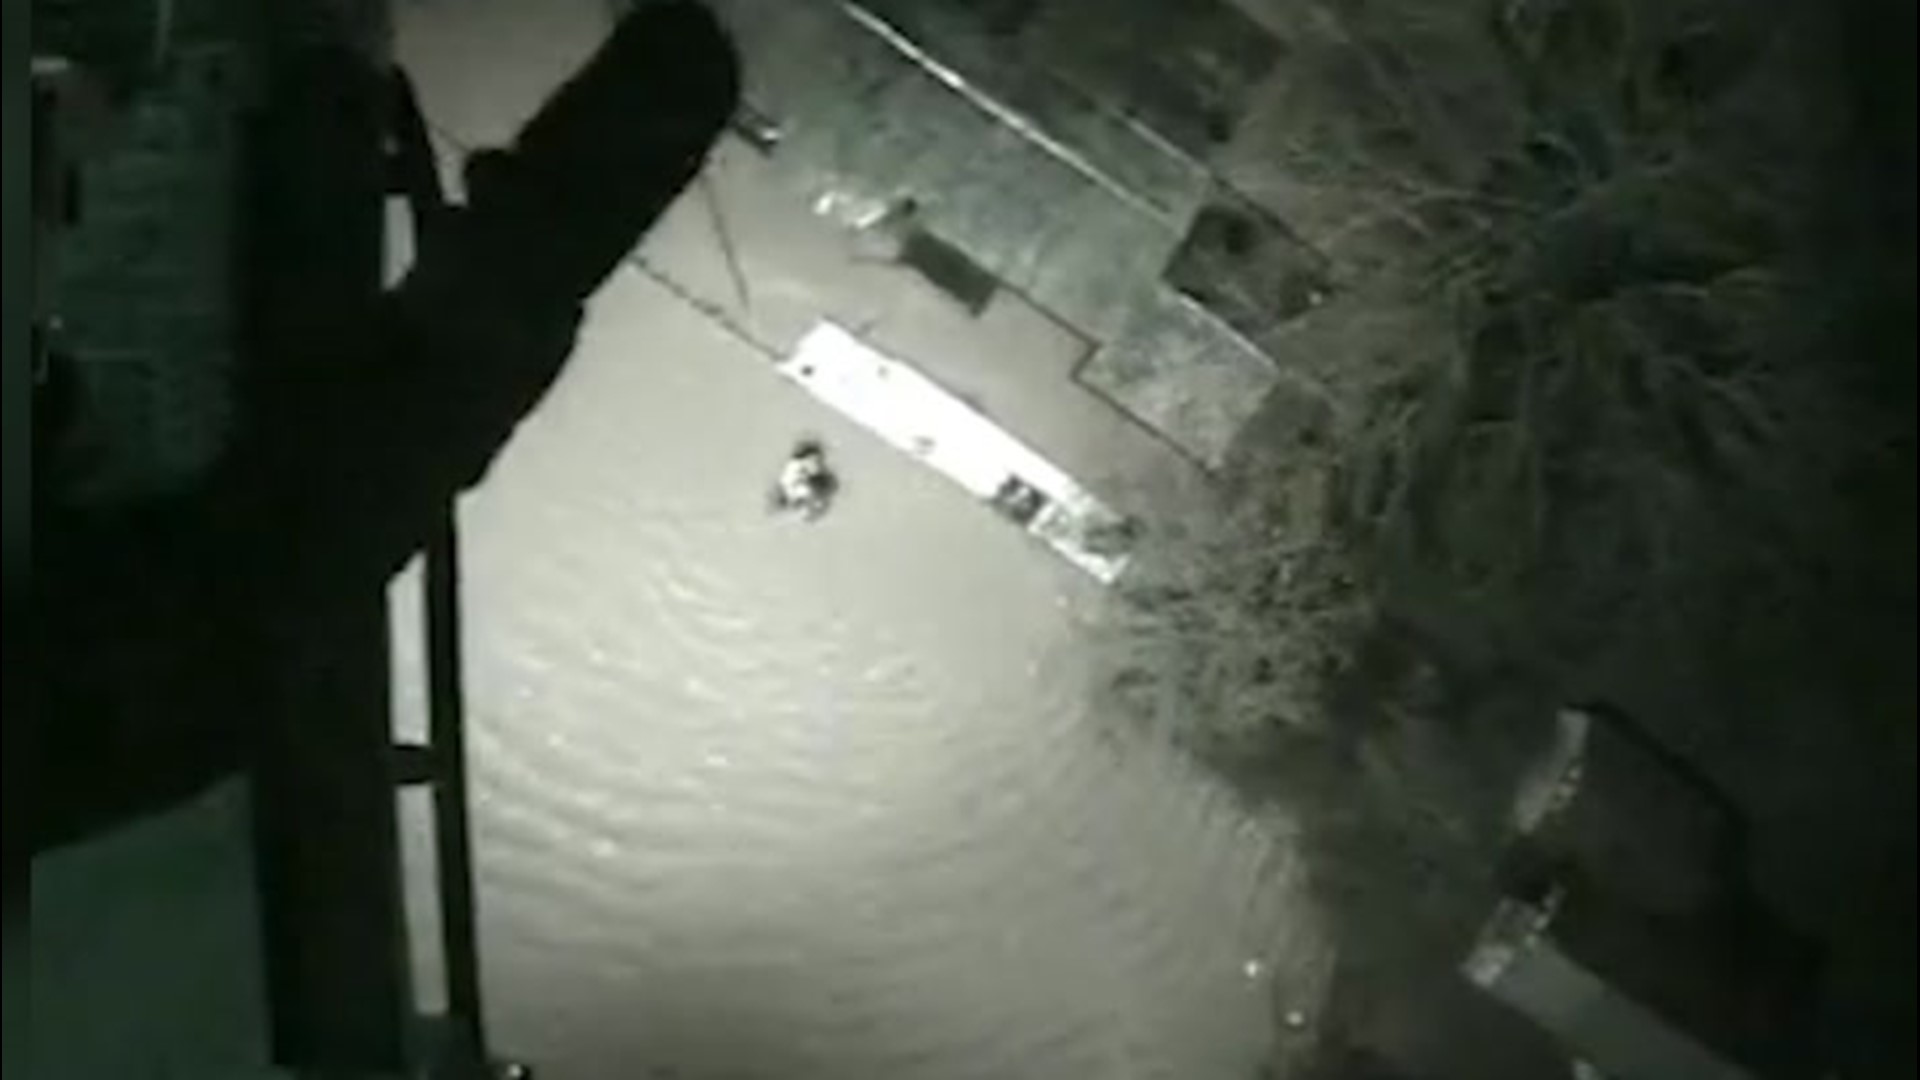 As floodwaters quickly rose in the Welsh town of Wrexham on Jan. 22, three people stranded on a ledge looked to the sky and found their way out.